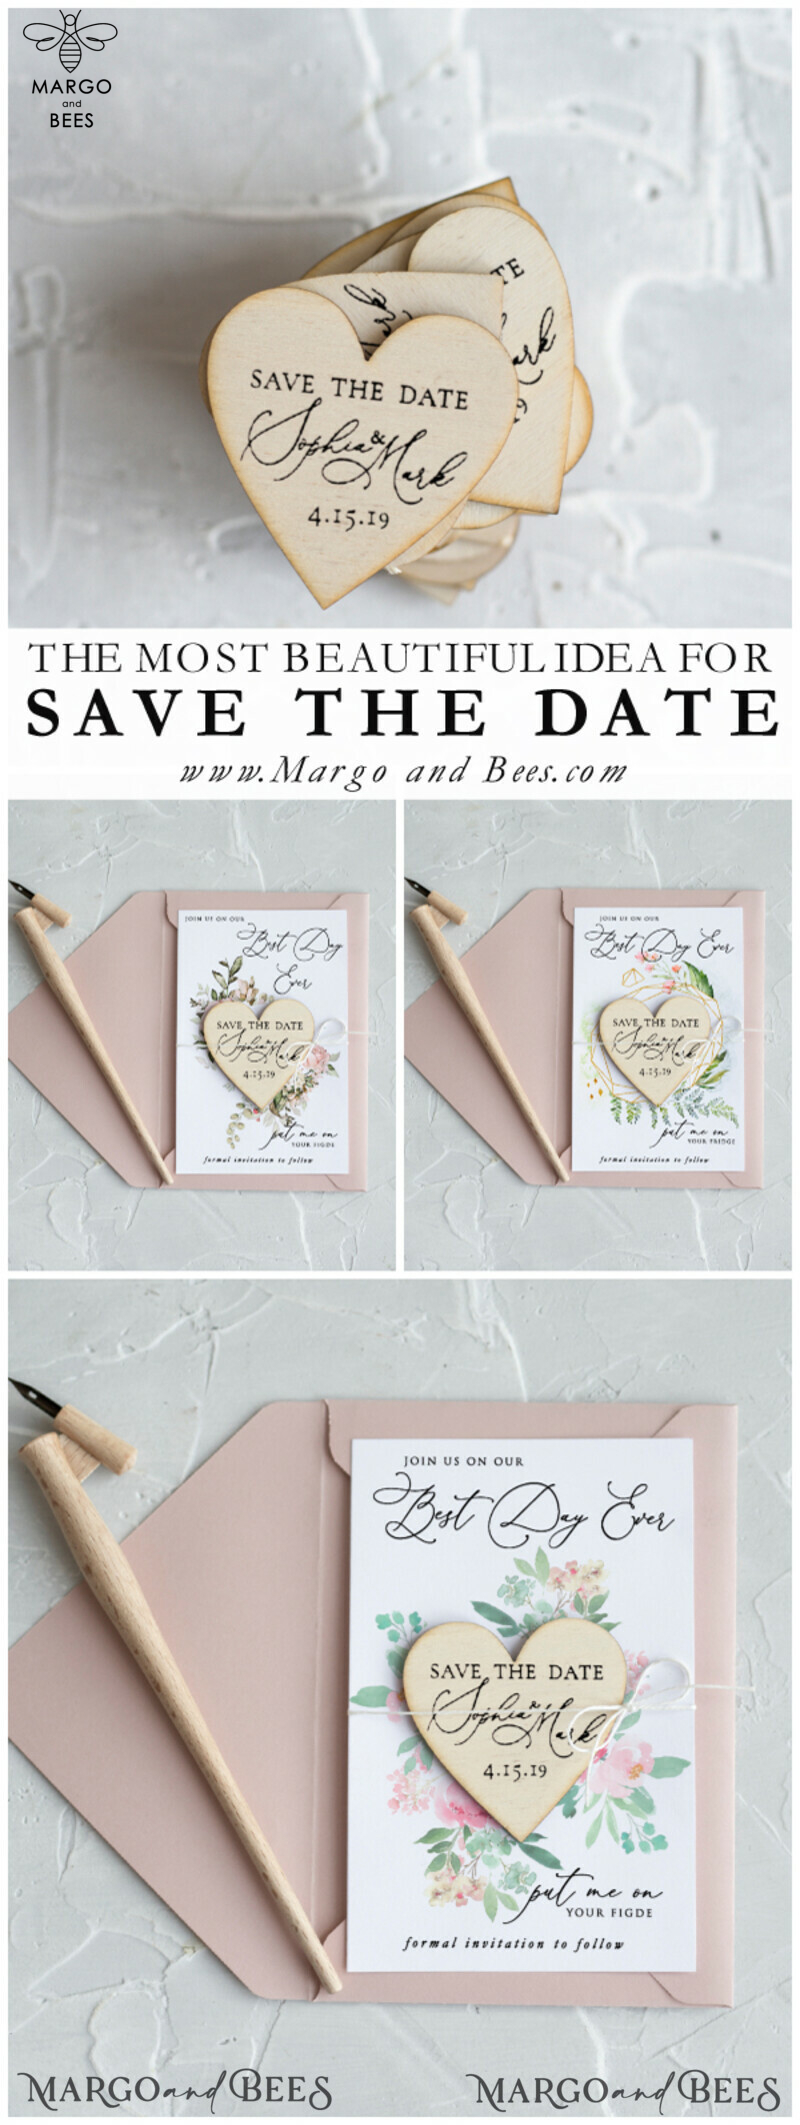 Wedding Save The Date Card and Heart Magnet: A Perfect Reminder on Your Fridge

Blush Pink Save Our Date Wood Magnets: A Chic and Romantic Way to Save the Date-6